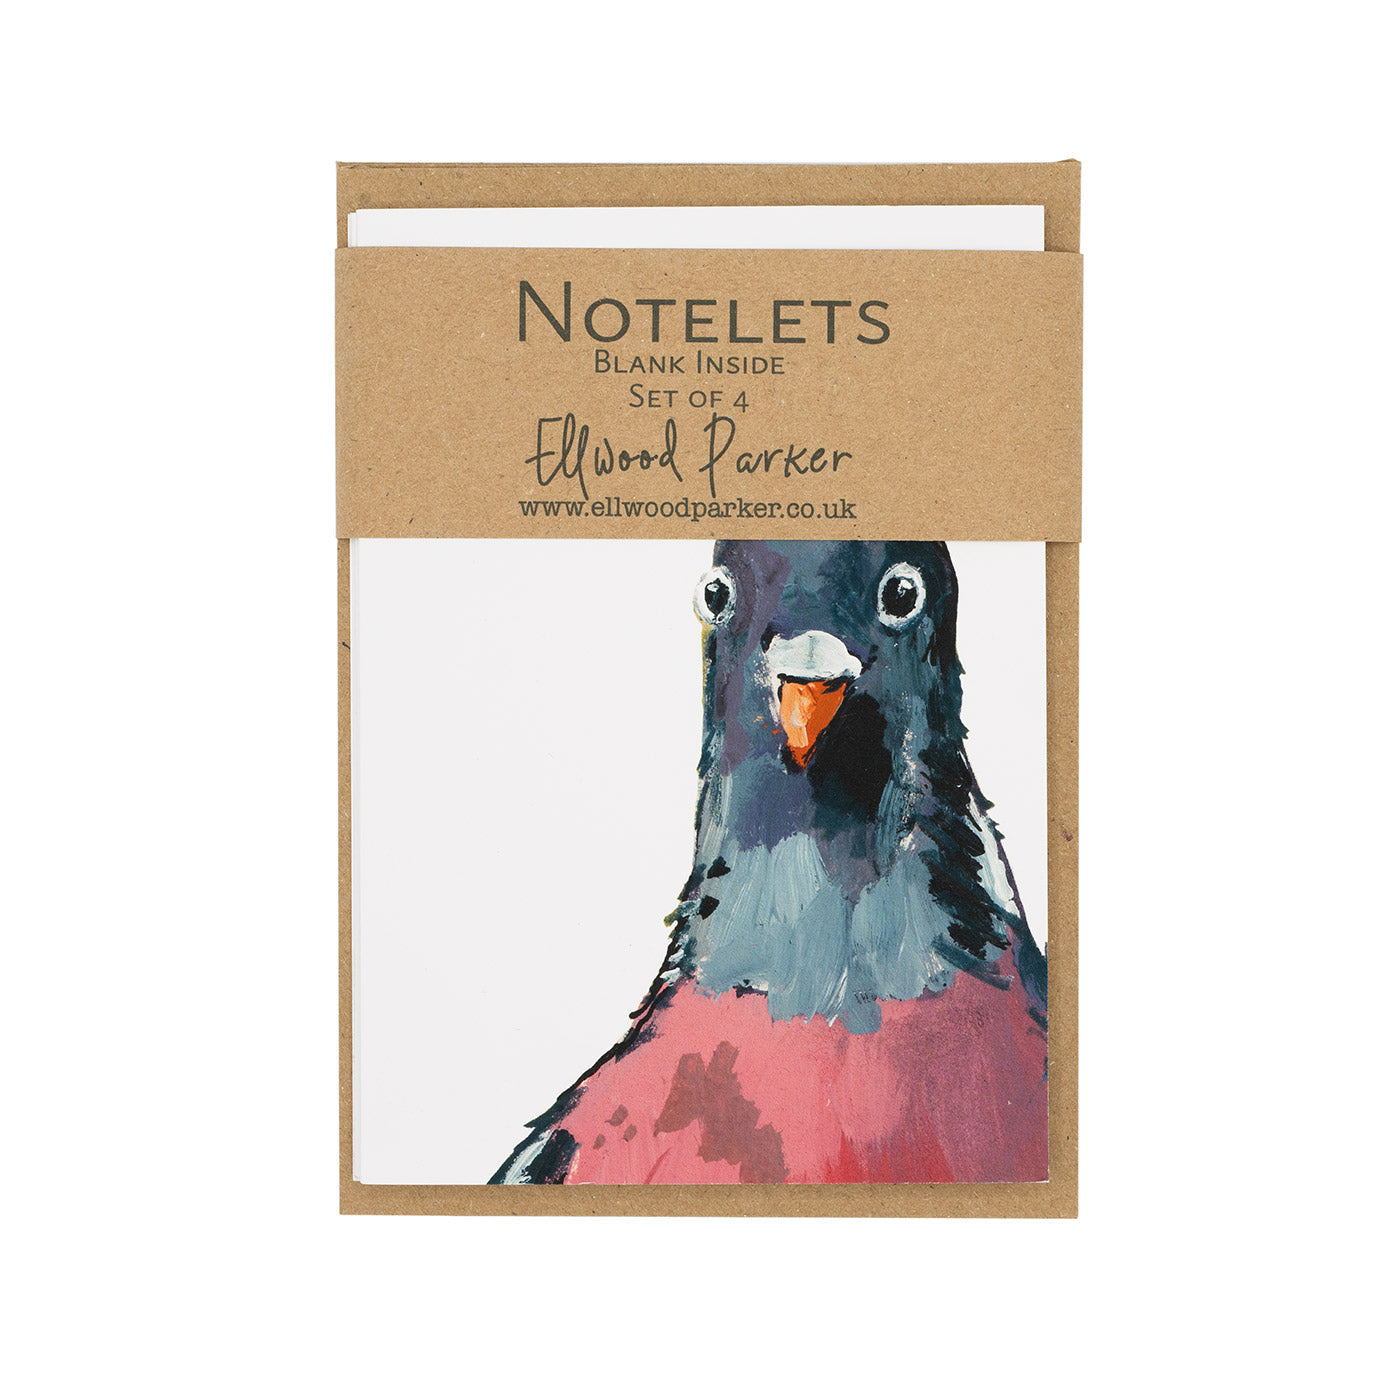 Photo of notelet pack featuring an illustration of a Pigeon with a brown belly band.